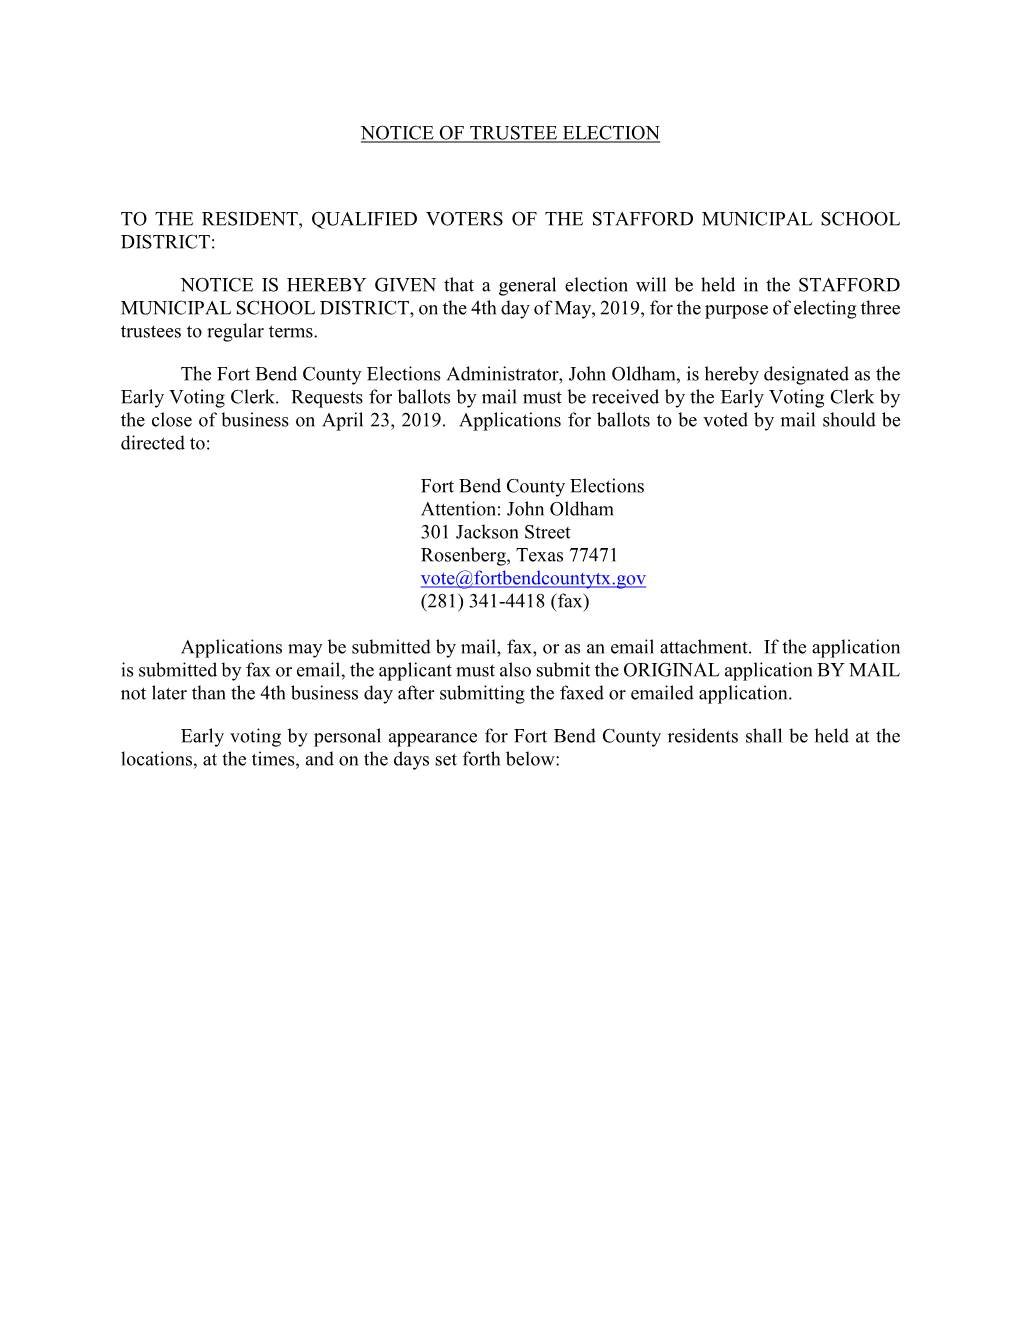 Notice of Trustee Election to the Resident, Qualified Voters of The